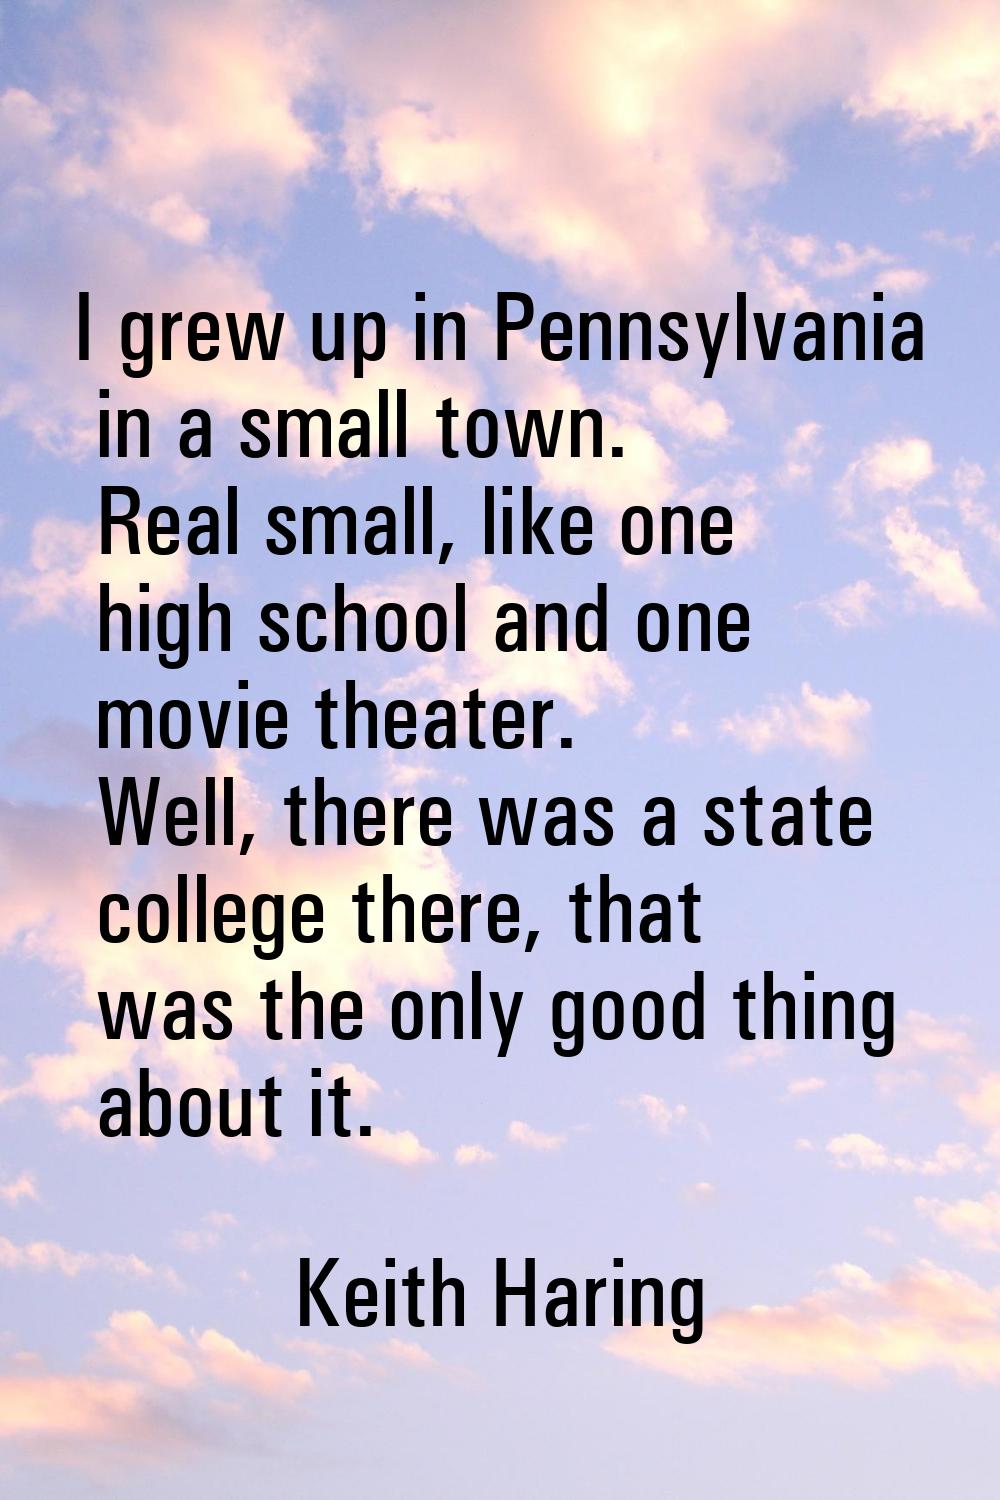 I grew up in Pennsylvania in a small town. Real small, like one high school and one movie theater. 